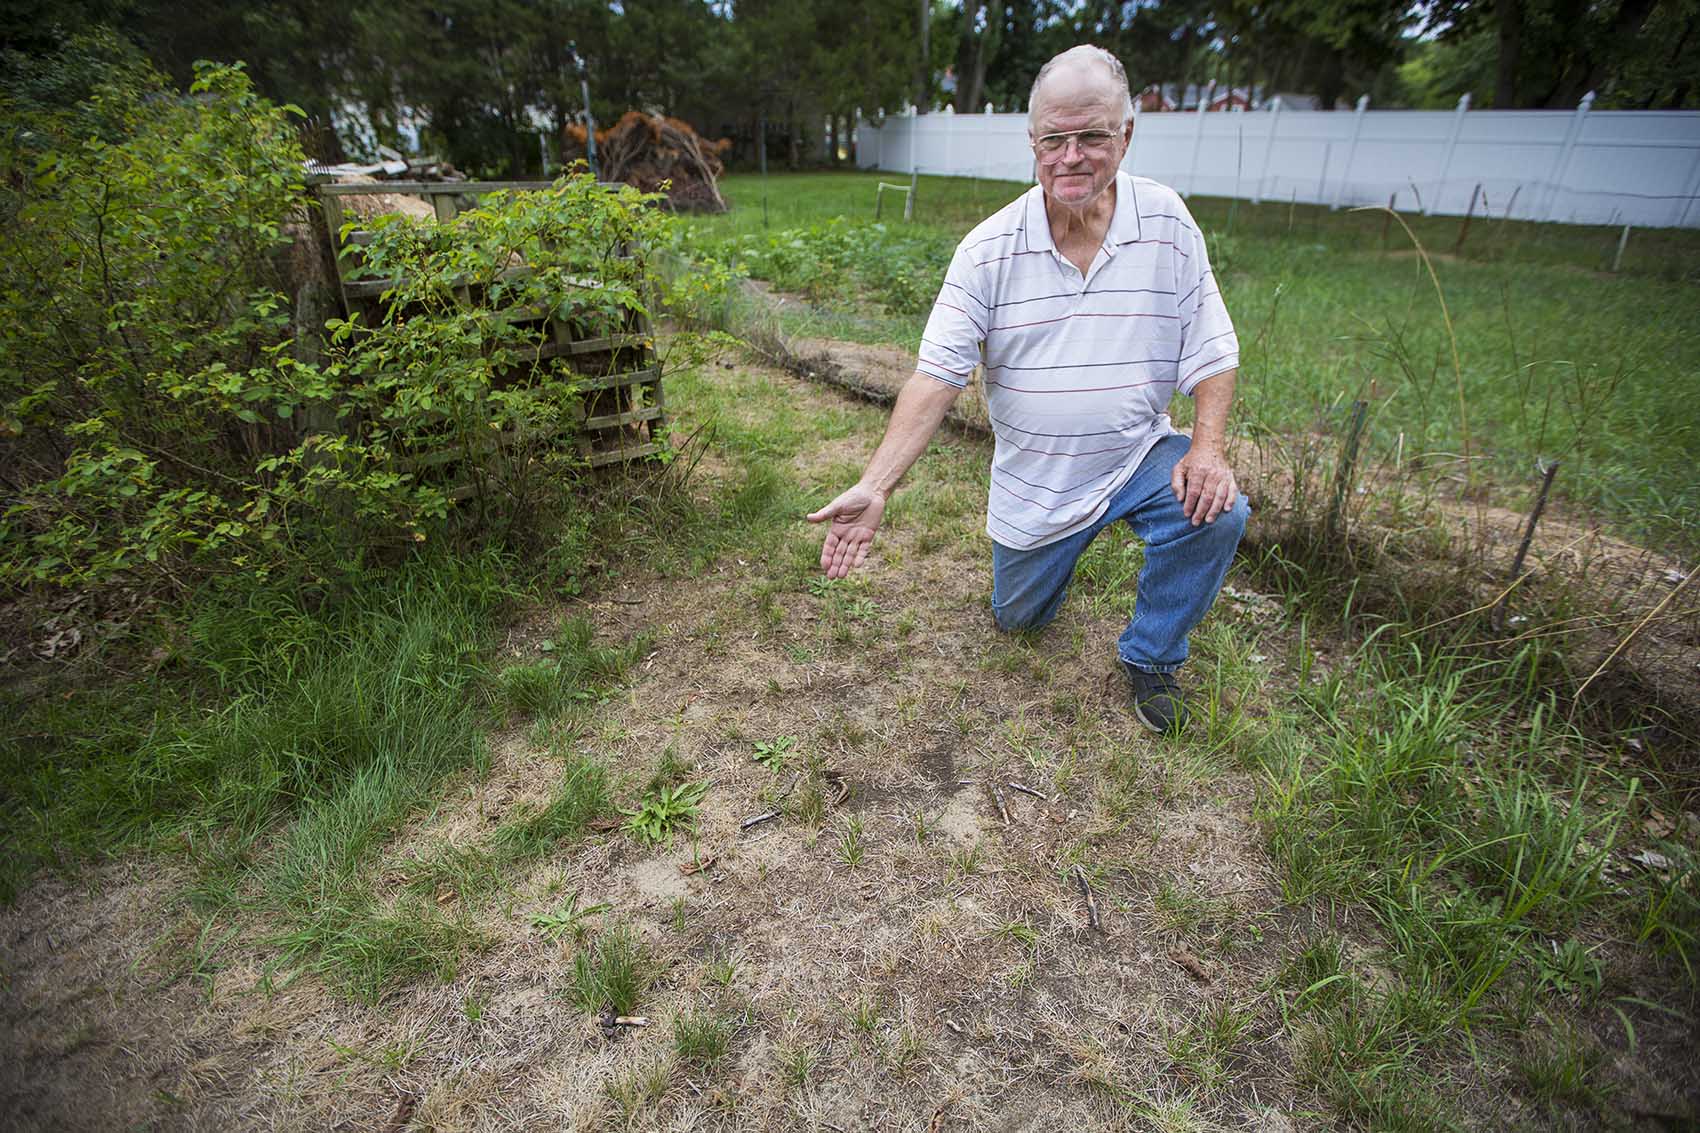 Fifty-year Billerica resident Tim Hinde displays his dried-out lawn, which he cannot water because of town restrictions on watering plants due to the summer drought conditions. (Jesse Costa/WBUR)